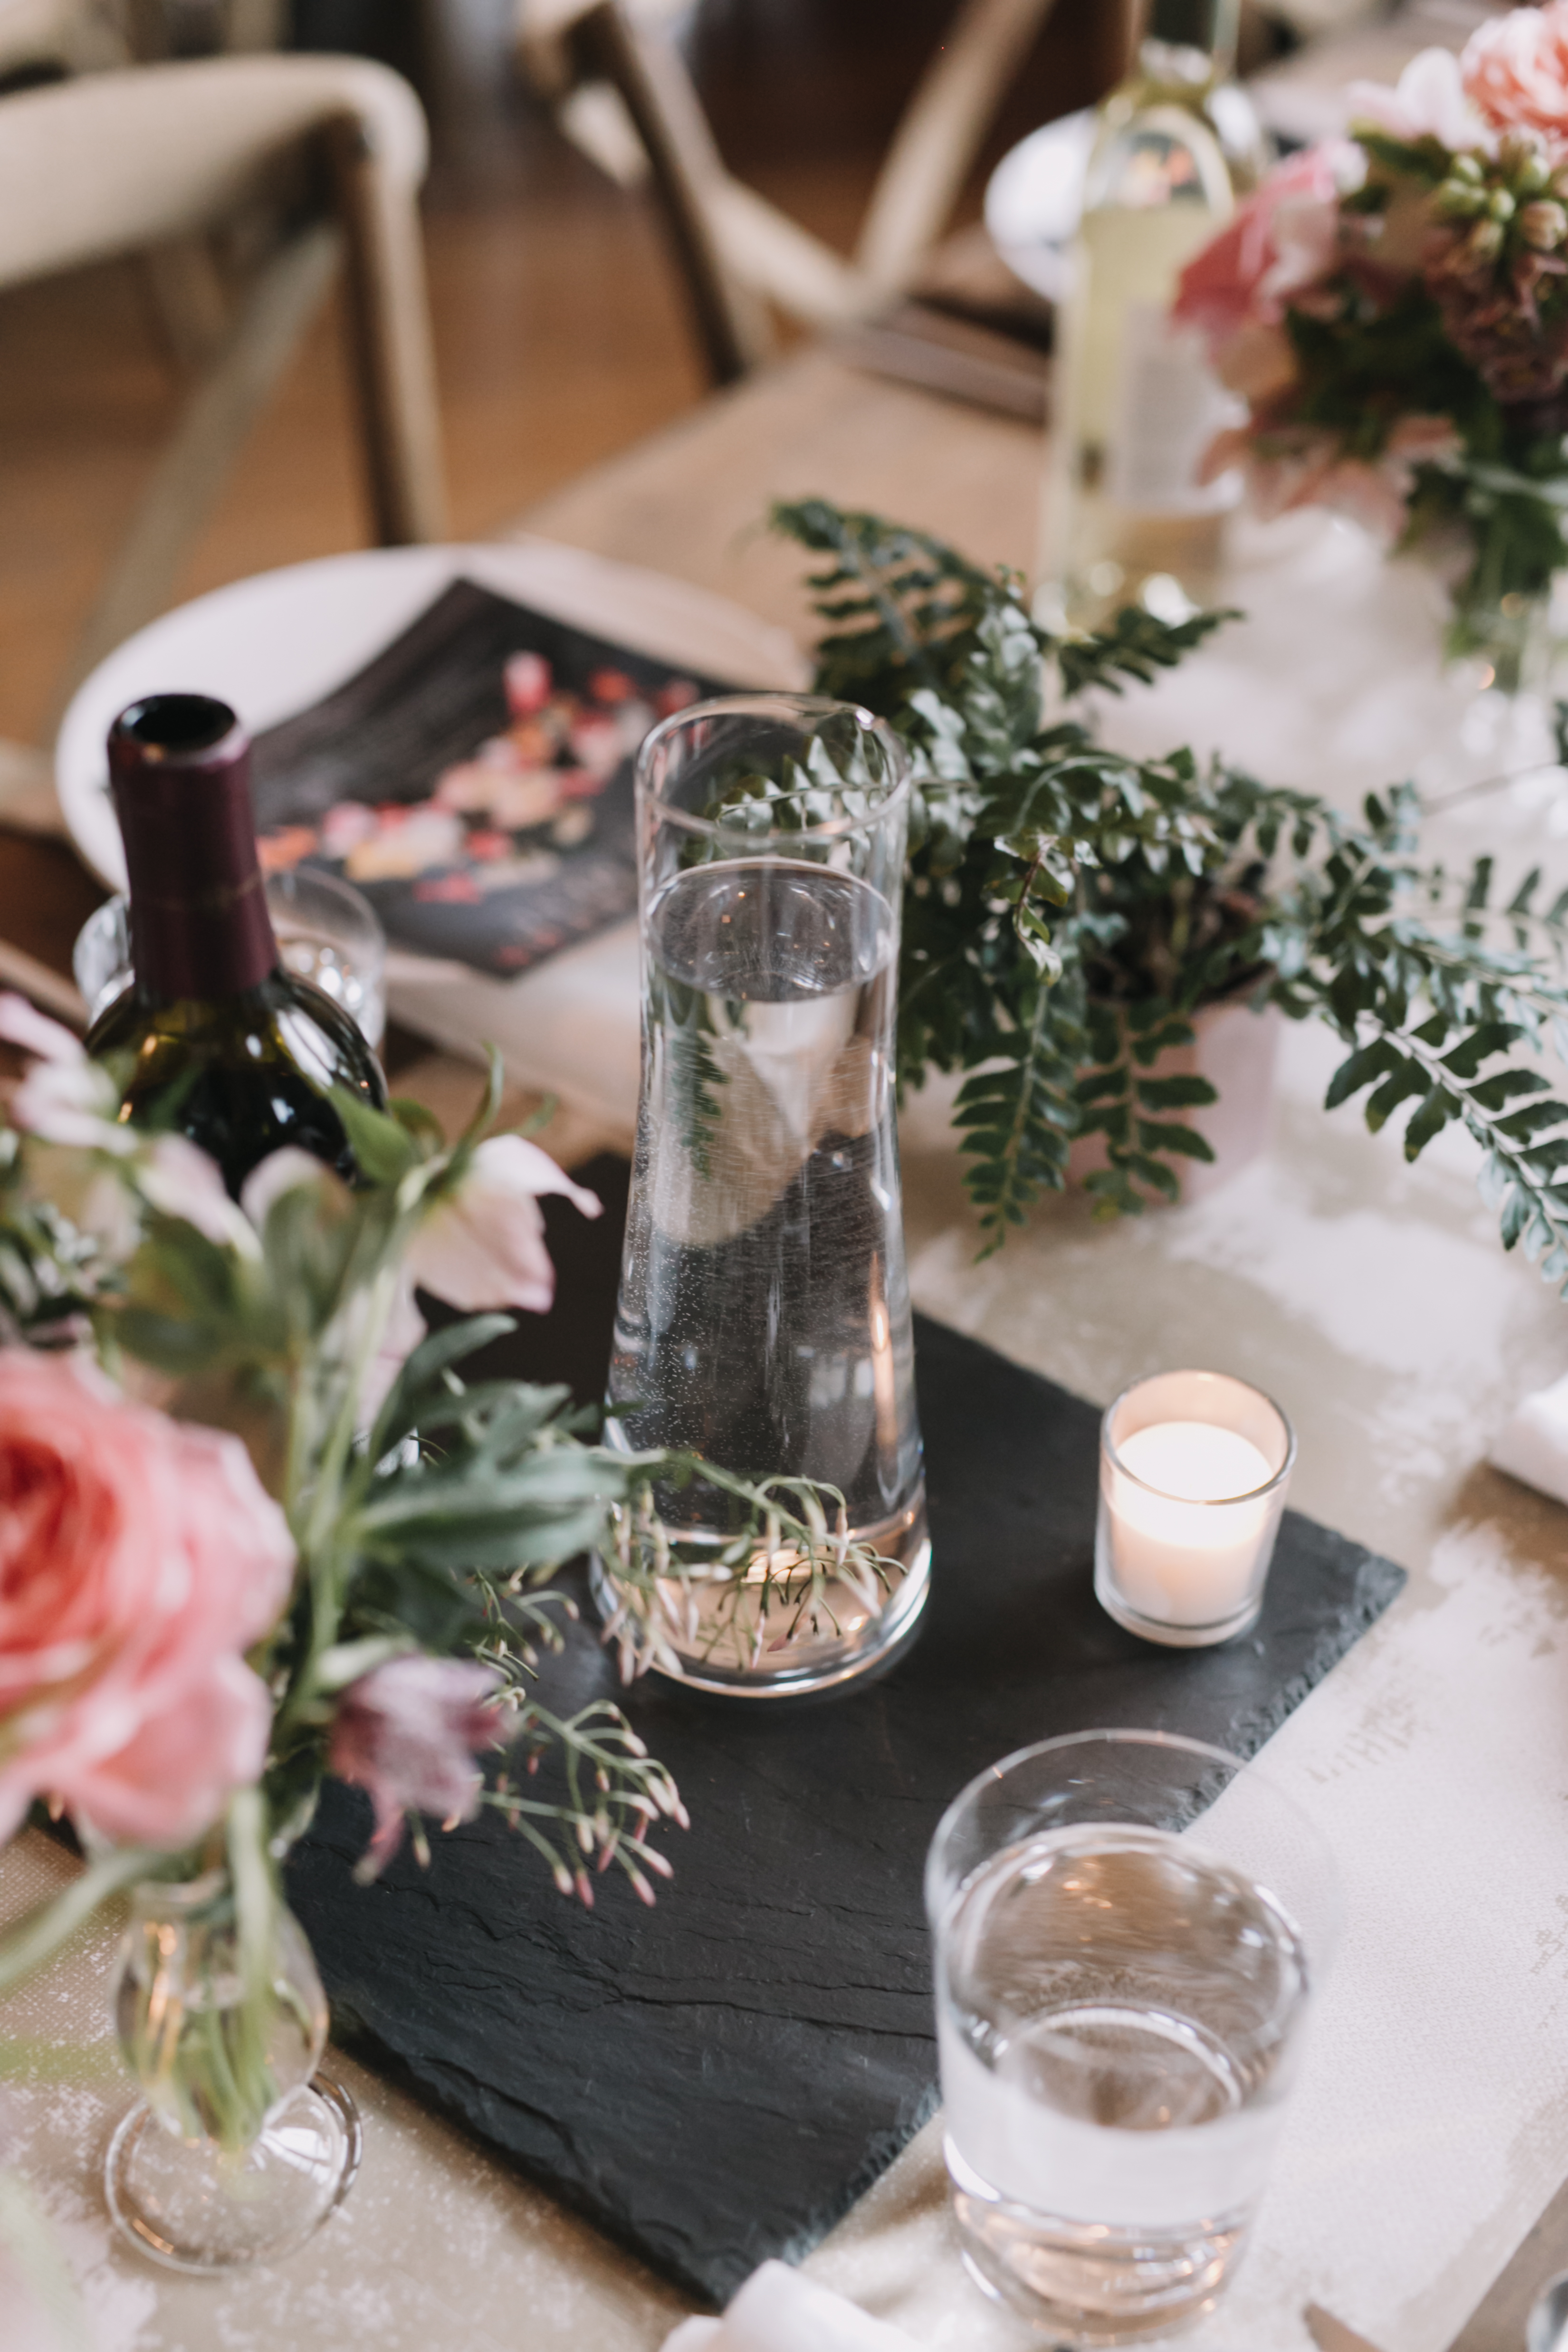 This weekend is your time to shine because we are going to throw you a family-style dinner party! You’ll find tips, tricks, and a few tried and true tidbits to help get your party pants on & throw the best family-style dinner party there ever was.